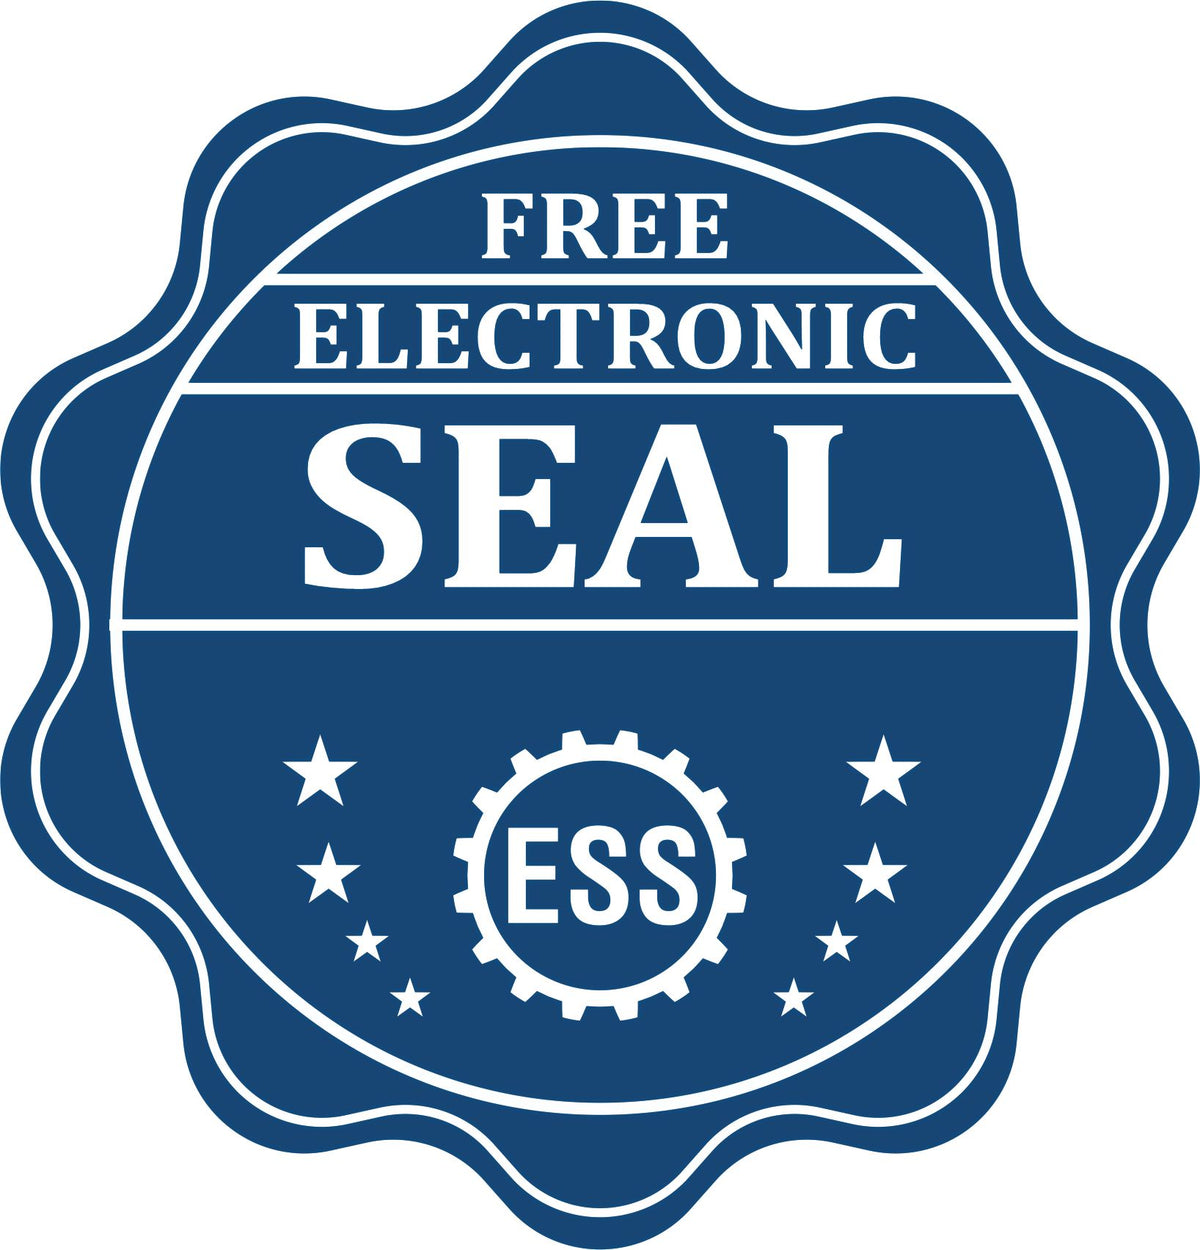 A badge showing a free electronic seal for the Hybrid Minnesota Engineer Seal with stars and the ESS gear on the emblem.